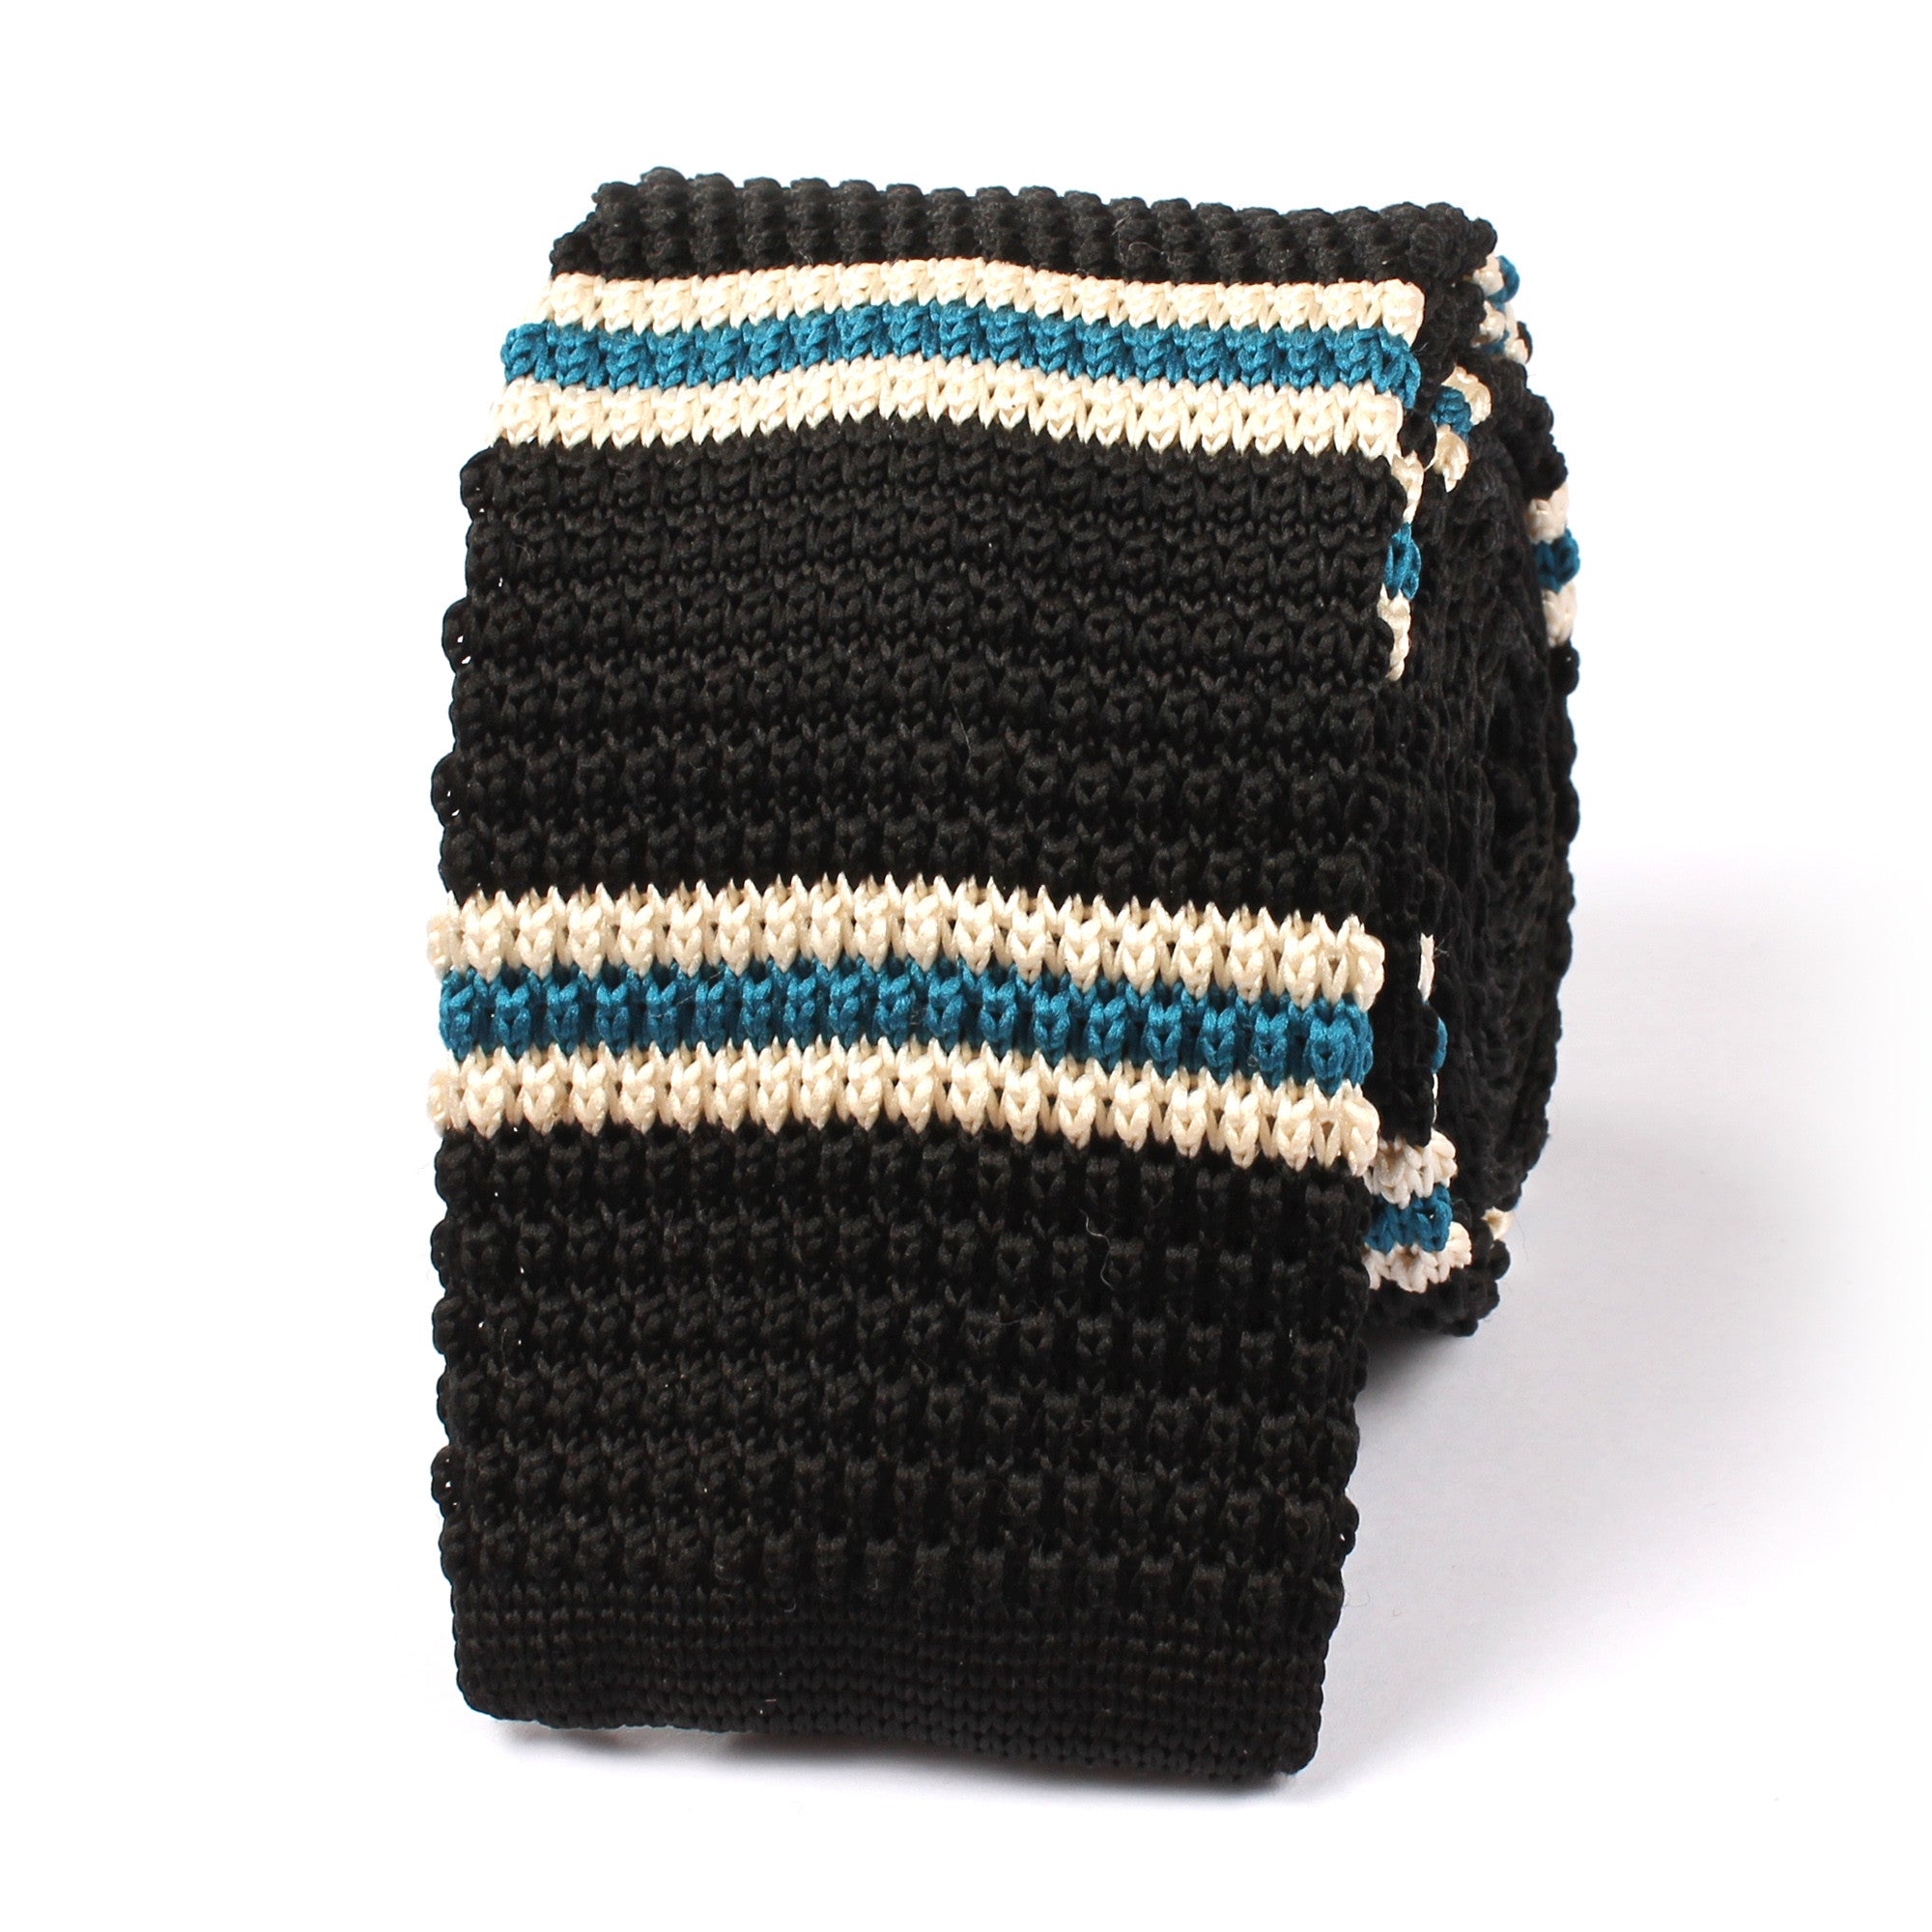 Black Knitted Tie with White & Blue Teal Stripes